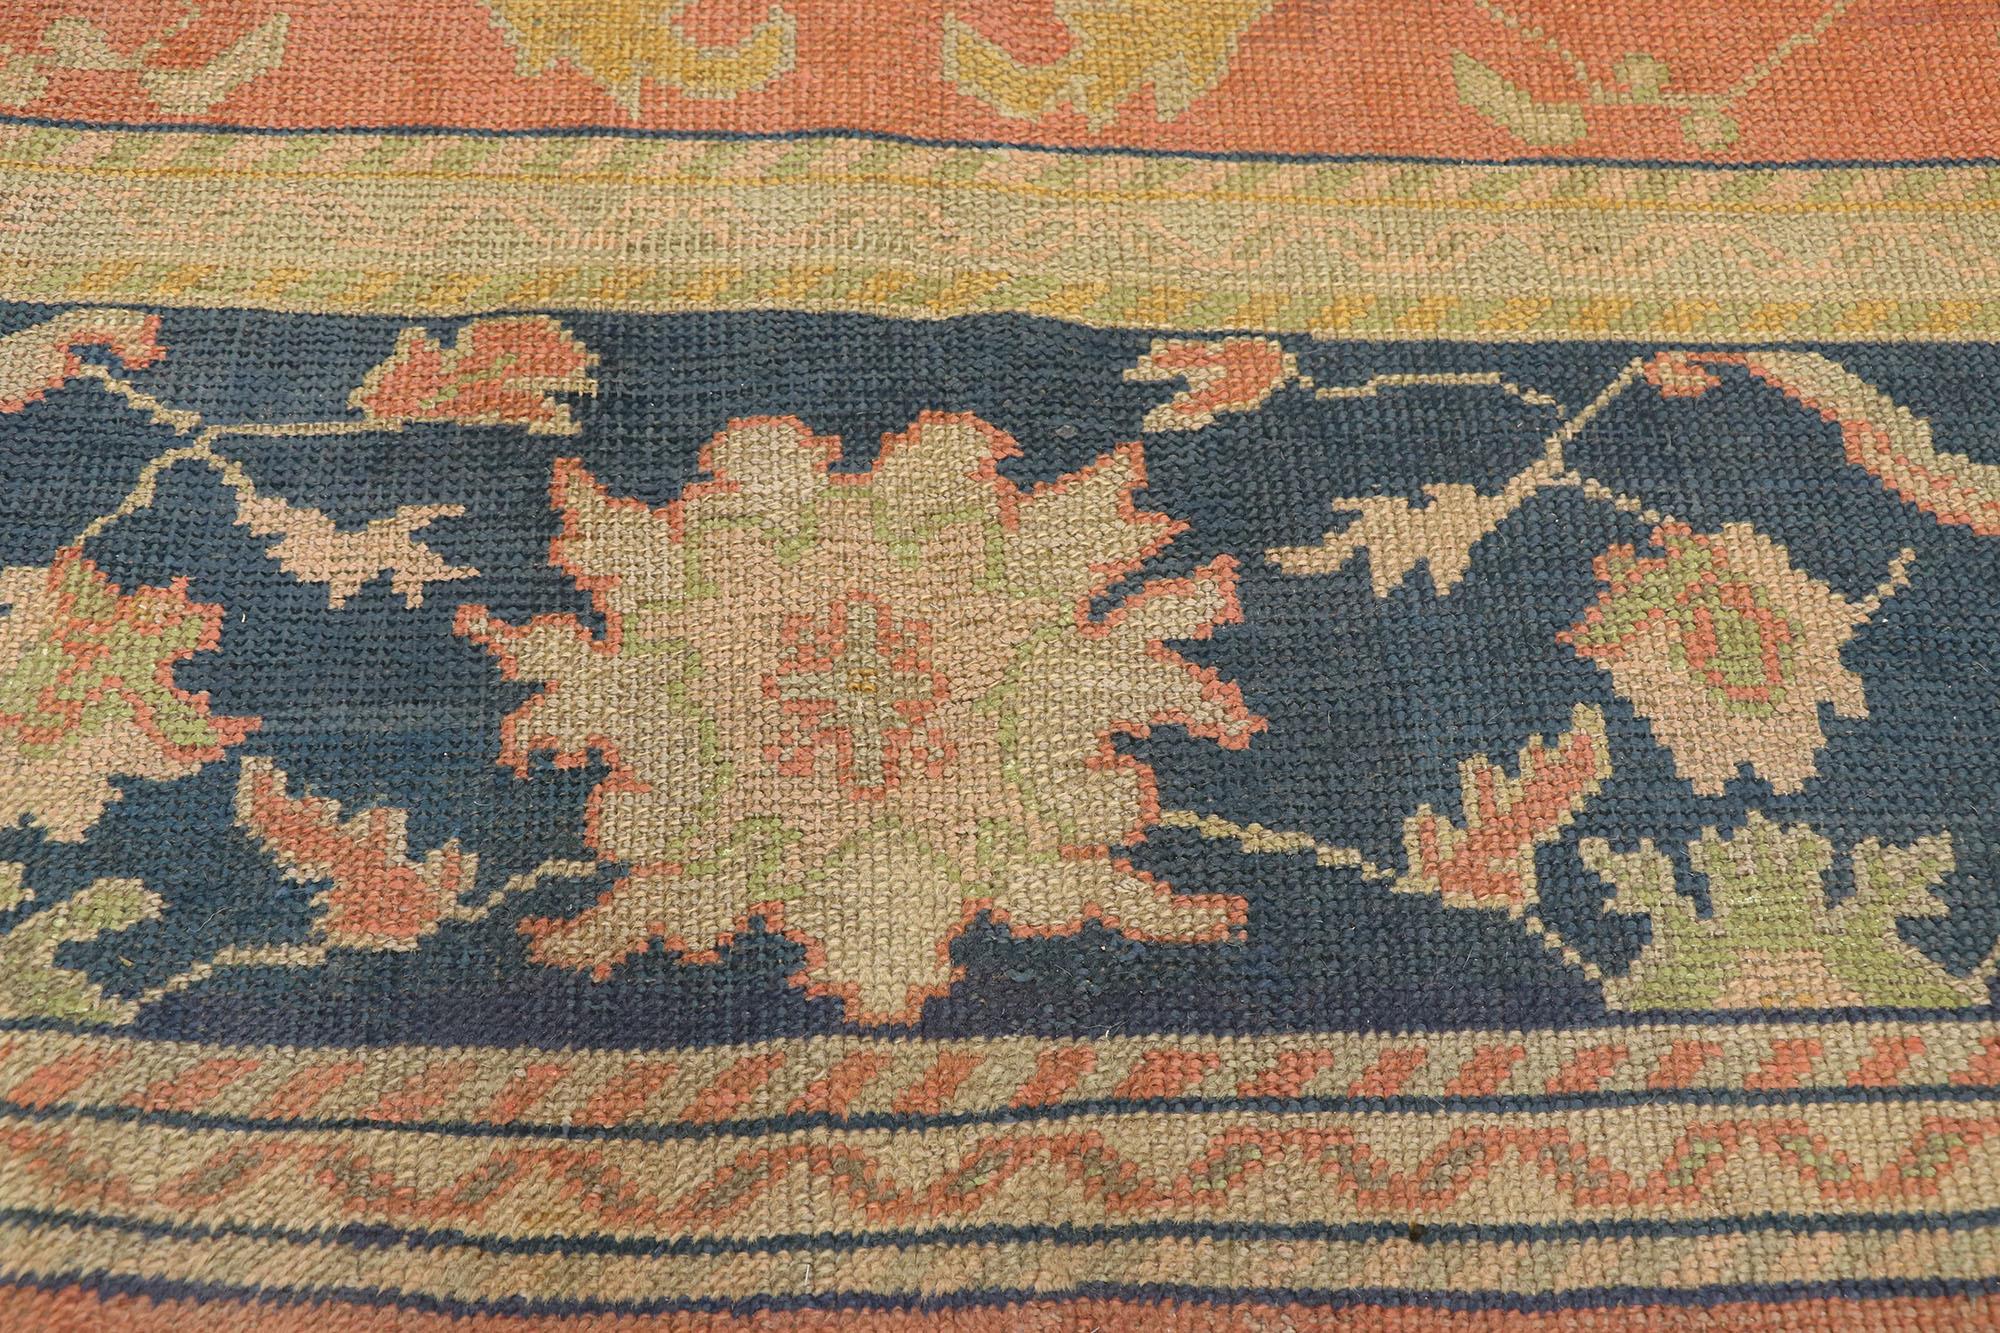 Antique Turkish Oushak Rug, Timeless Appeal Meets Mediterranean Chic In Good Condition For Sale In Dallas, TX